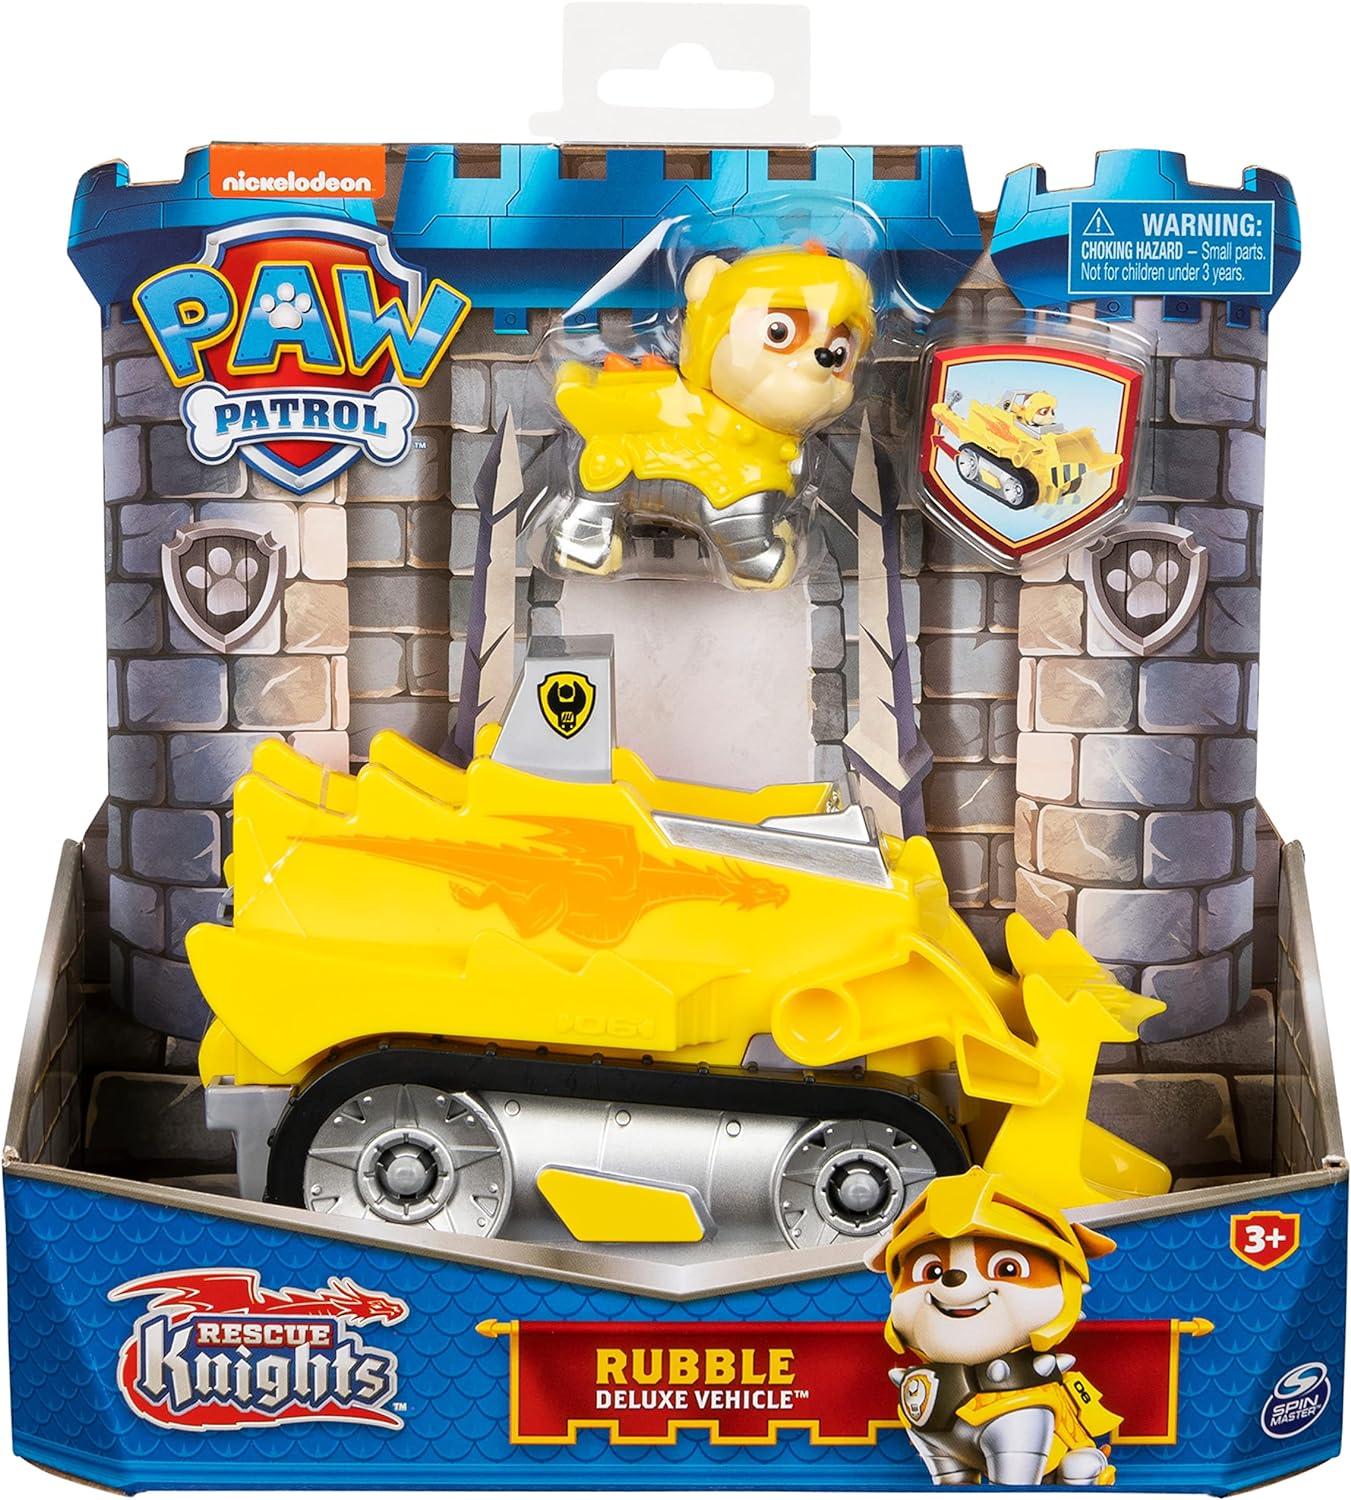 Paw Patrol Rescue Knights RUBBLE Deluxe Vehicle